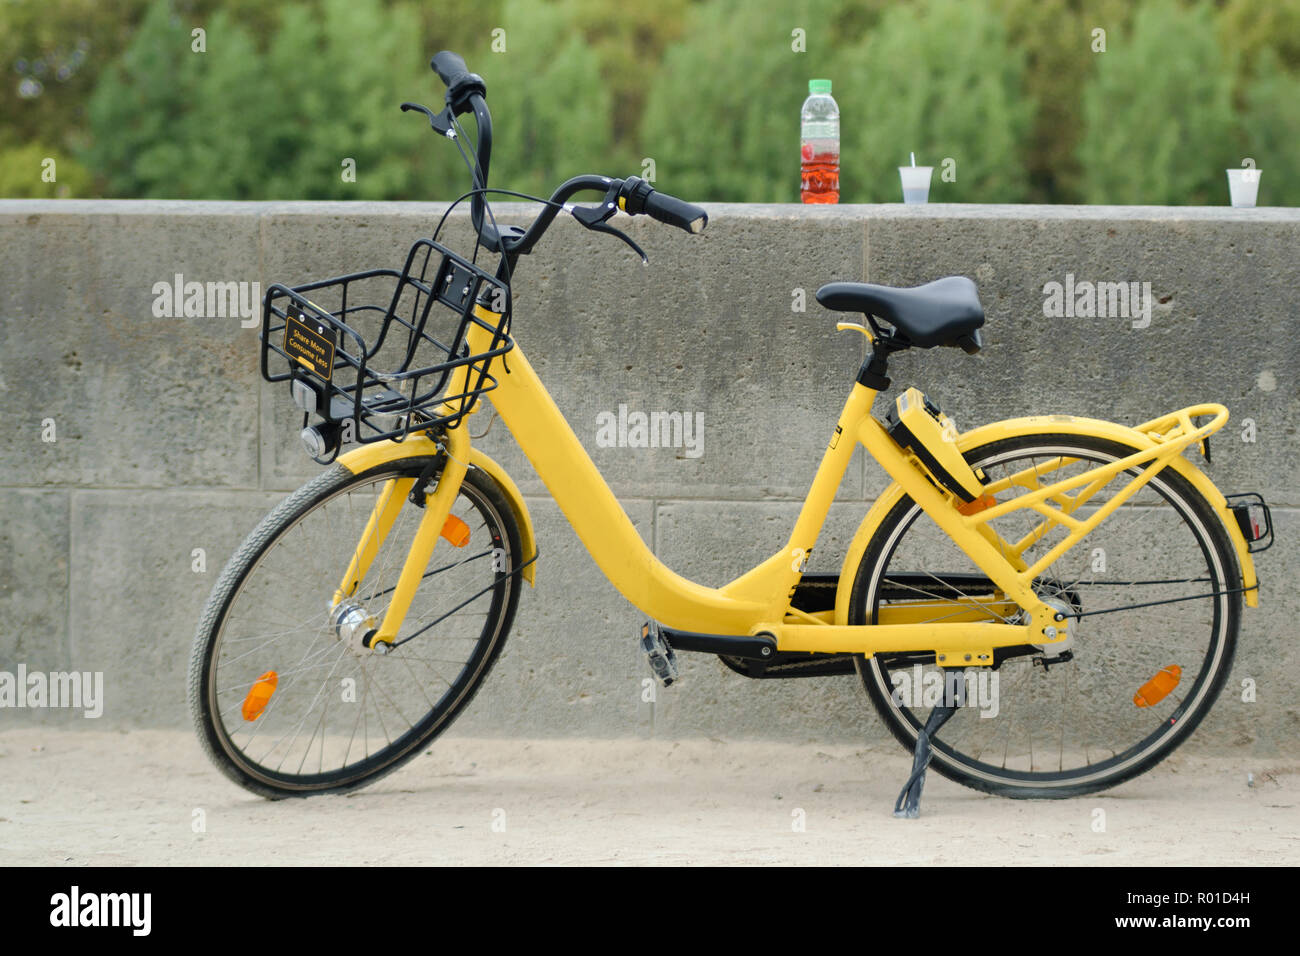 Yellow bike from bike sharing company parked next to the wall with drink and plastic cups Stock Photo